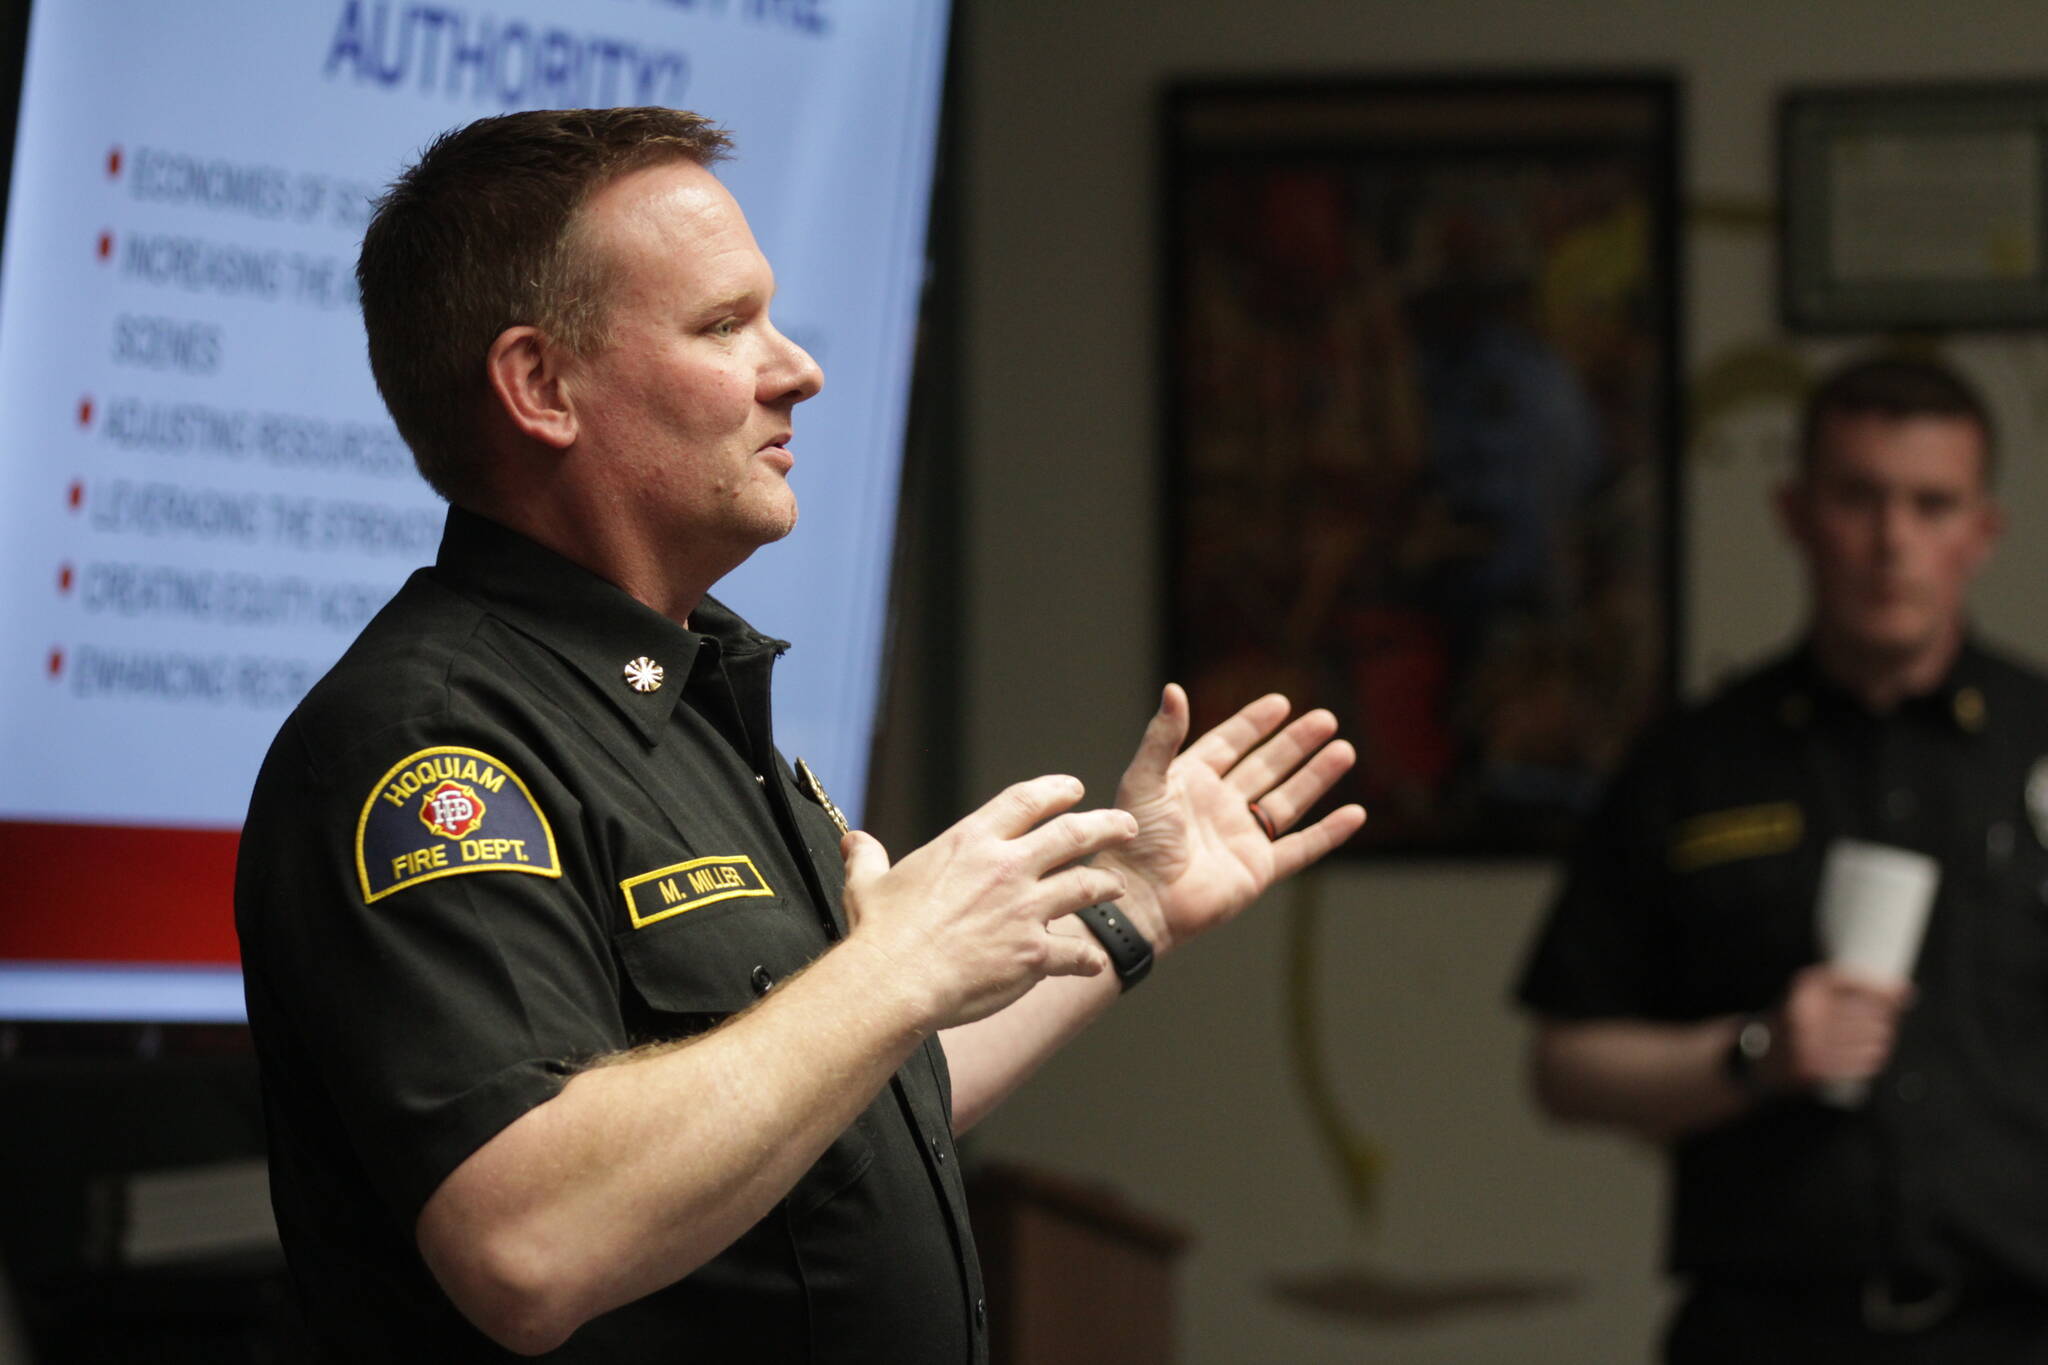 Hoquiam Fire Chief Matt Miller speaks to members of the public during a meeting about the proposed creation of a regional fire authority for Central Grays Harbor on March 28. (Michael S. Lockett / The Daily World)